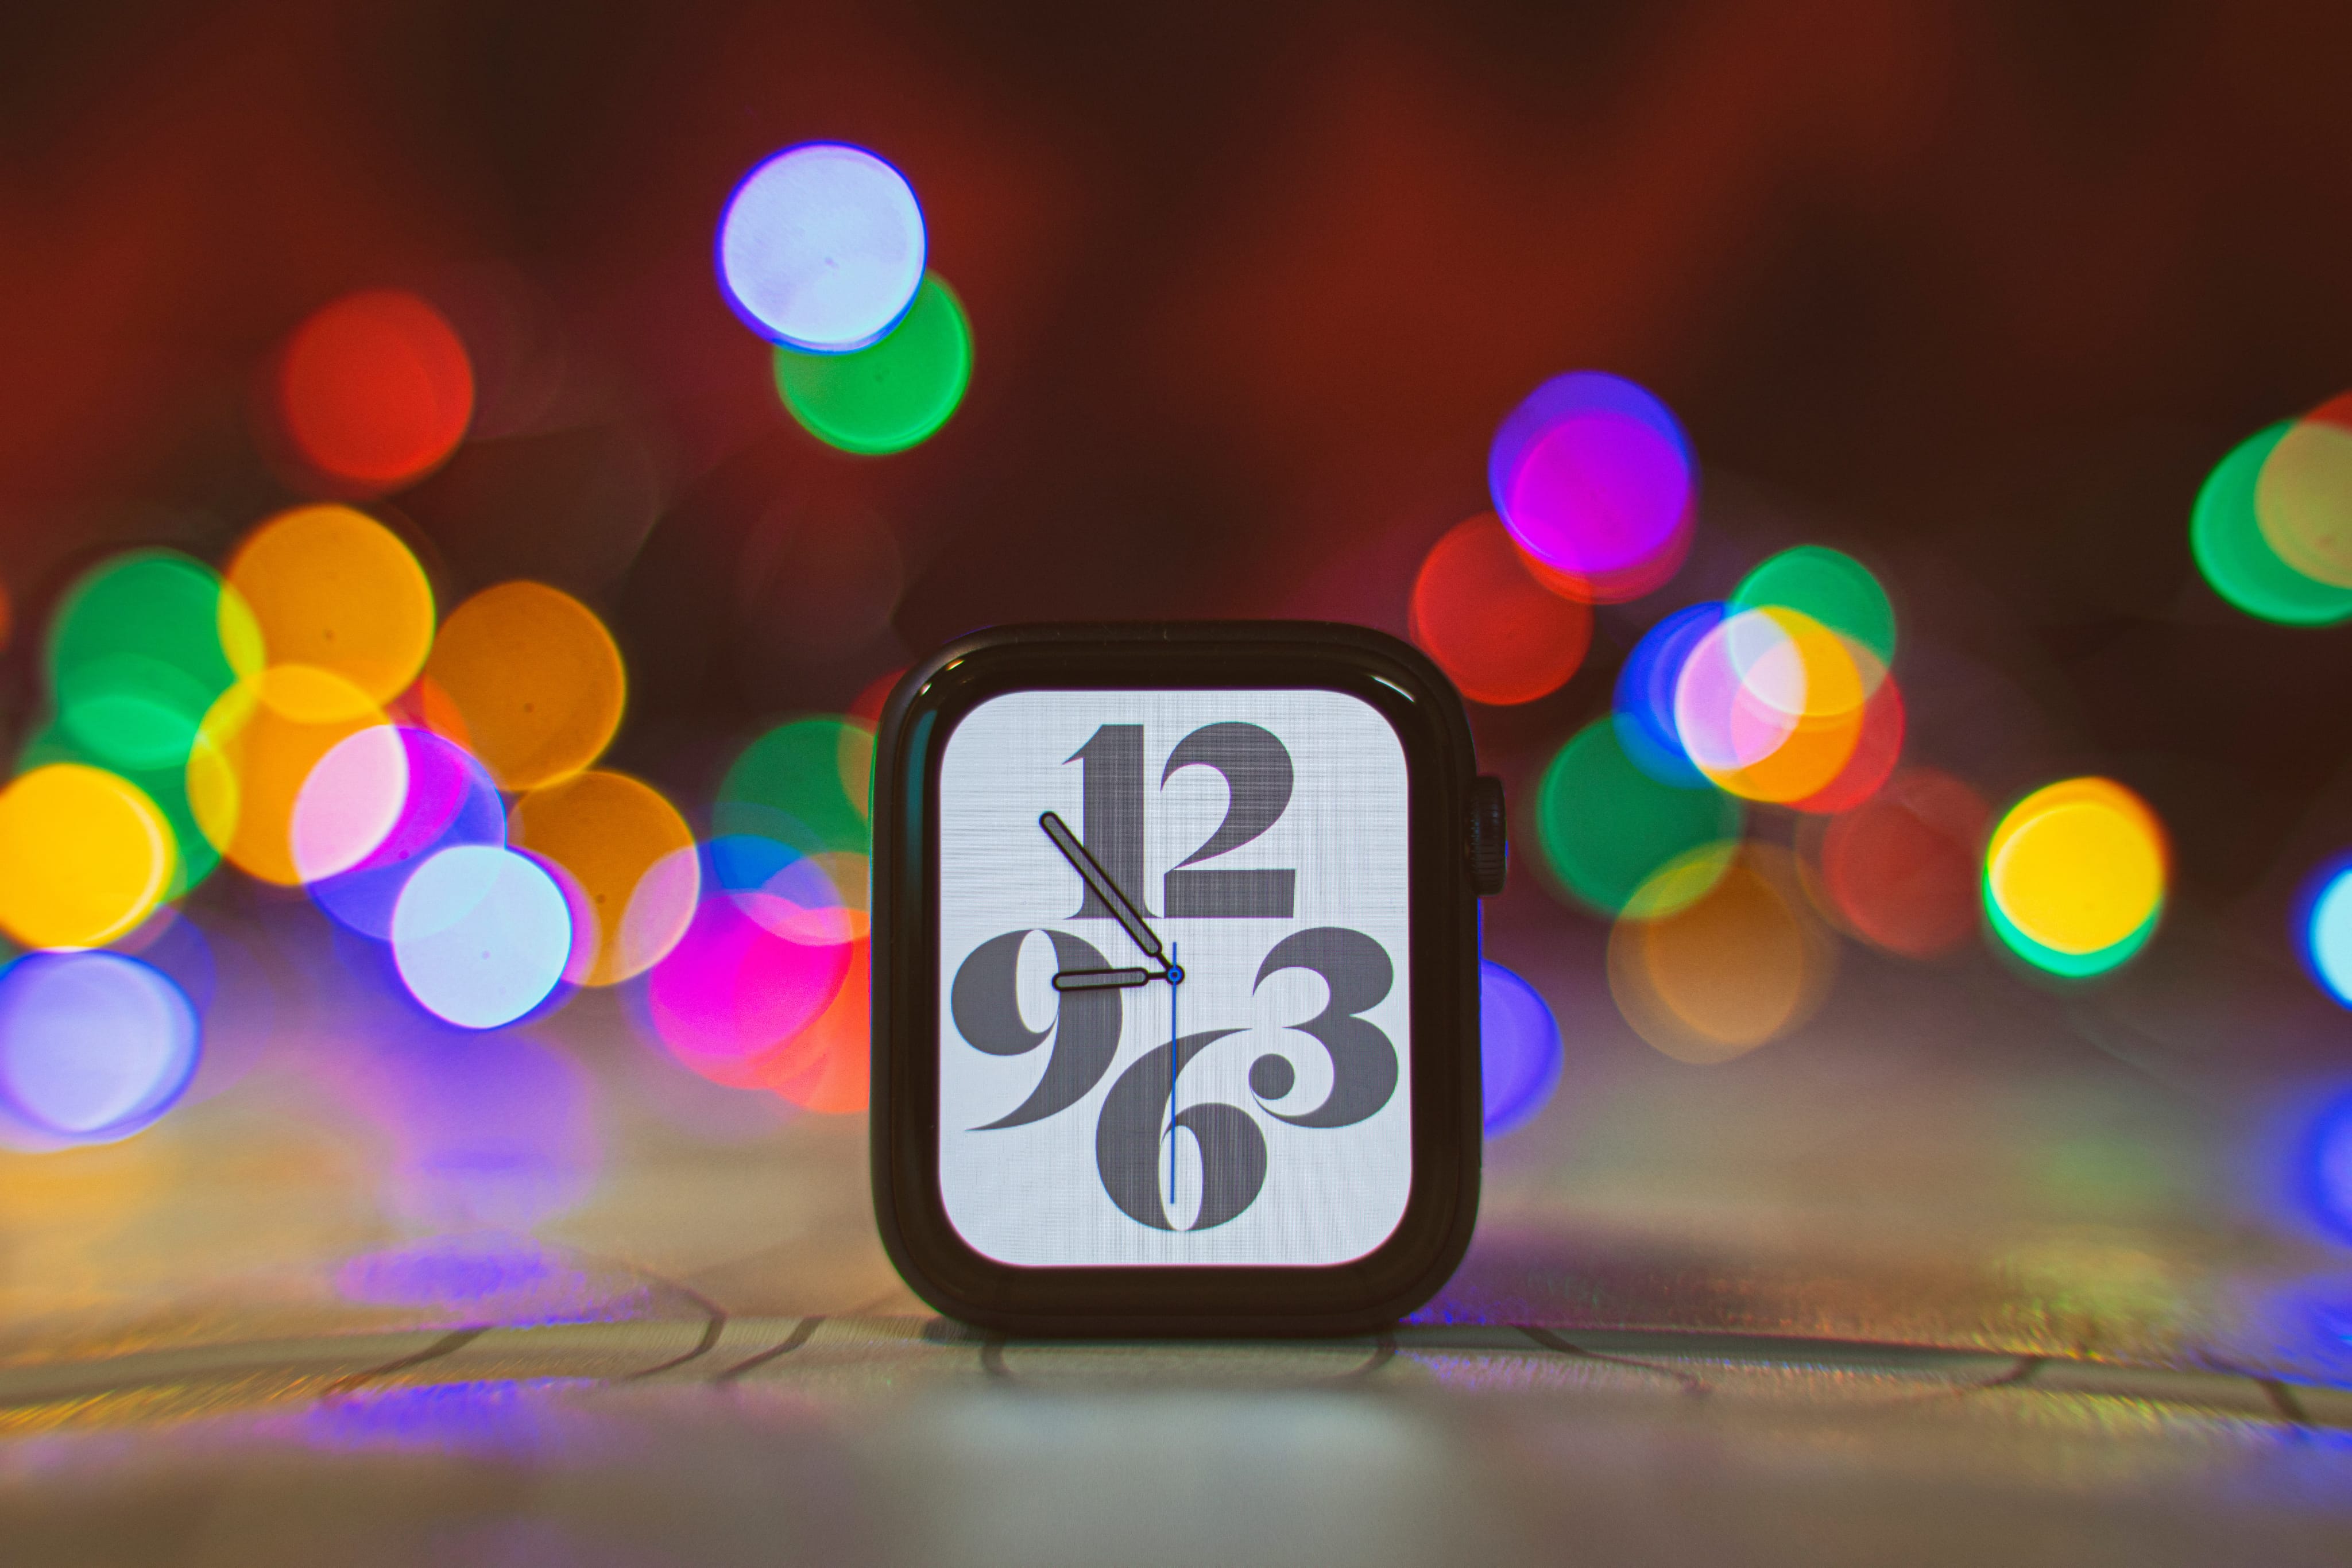 A photograph showing an Apple Watch Series 6 case sitting upright on a table, with a colorful lights in the background blurred with a depth-of-field effect